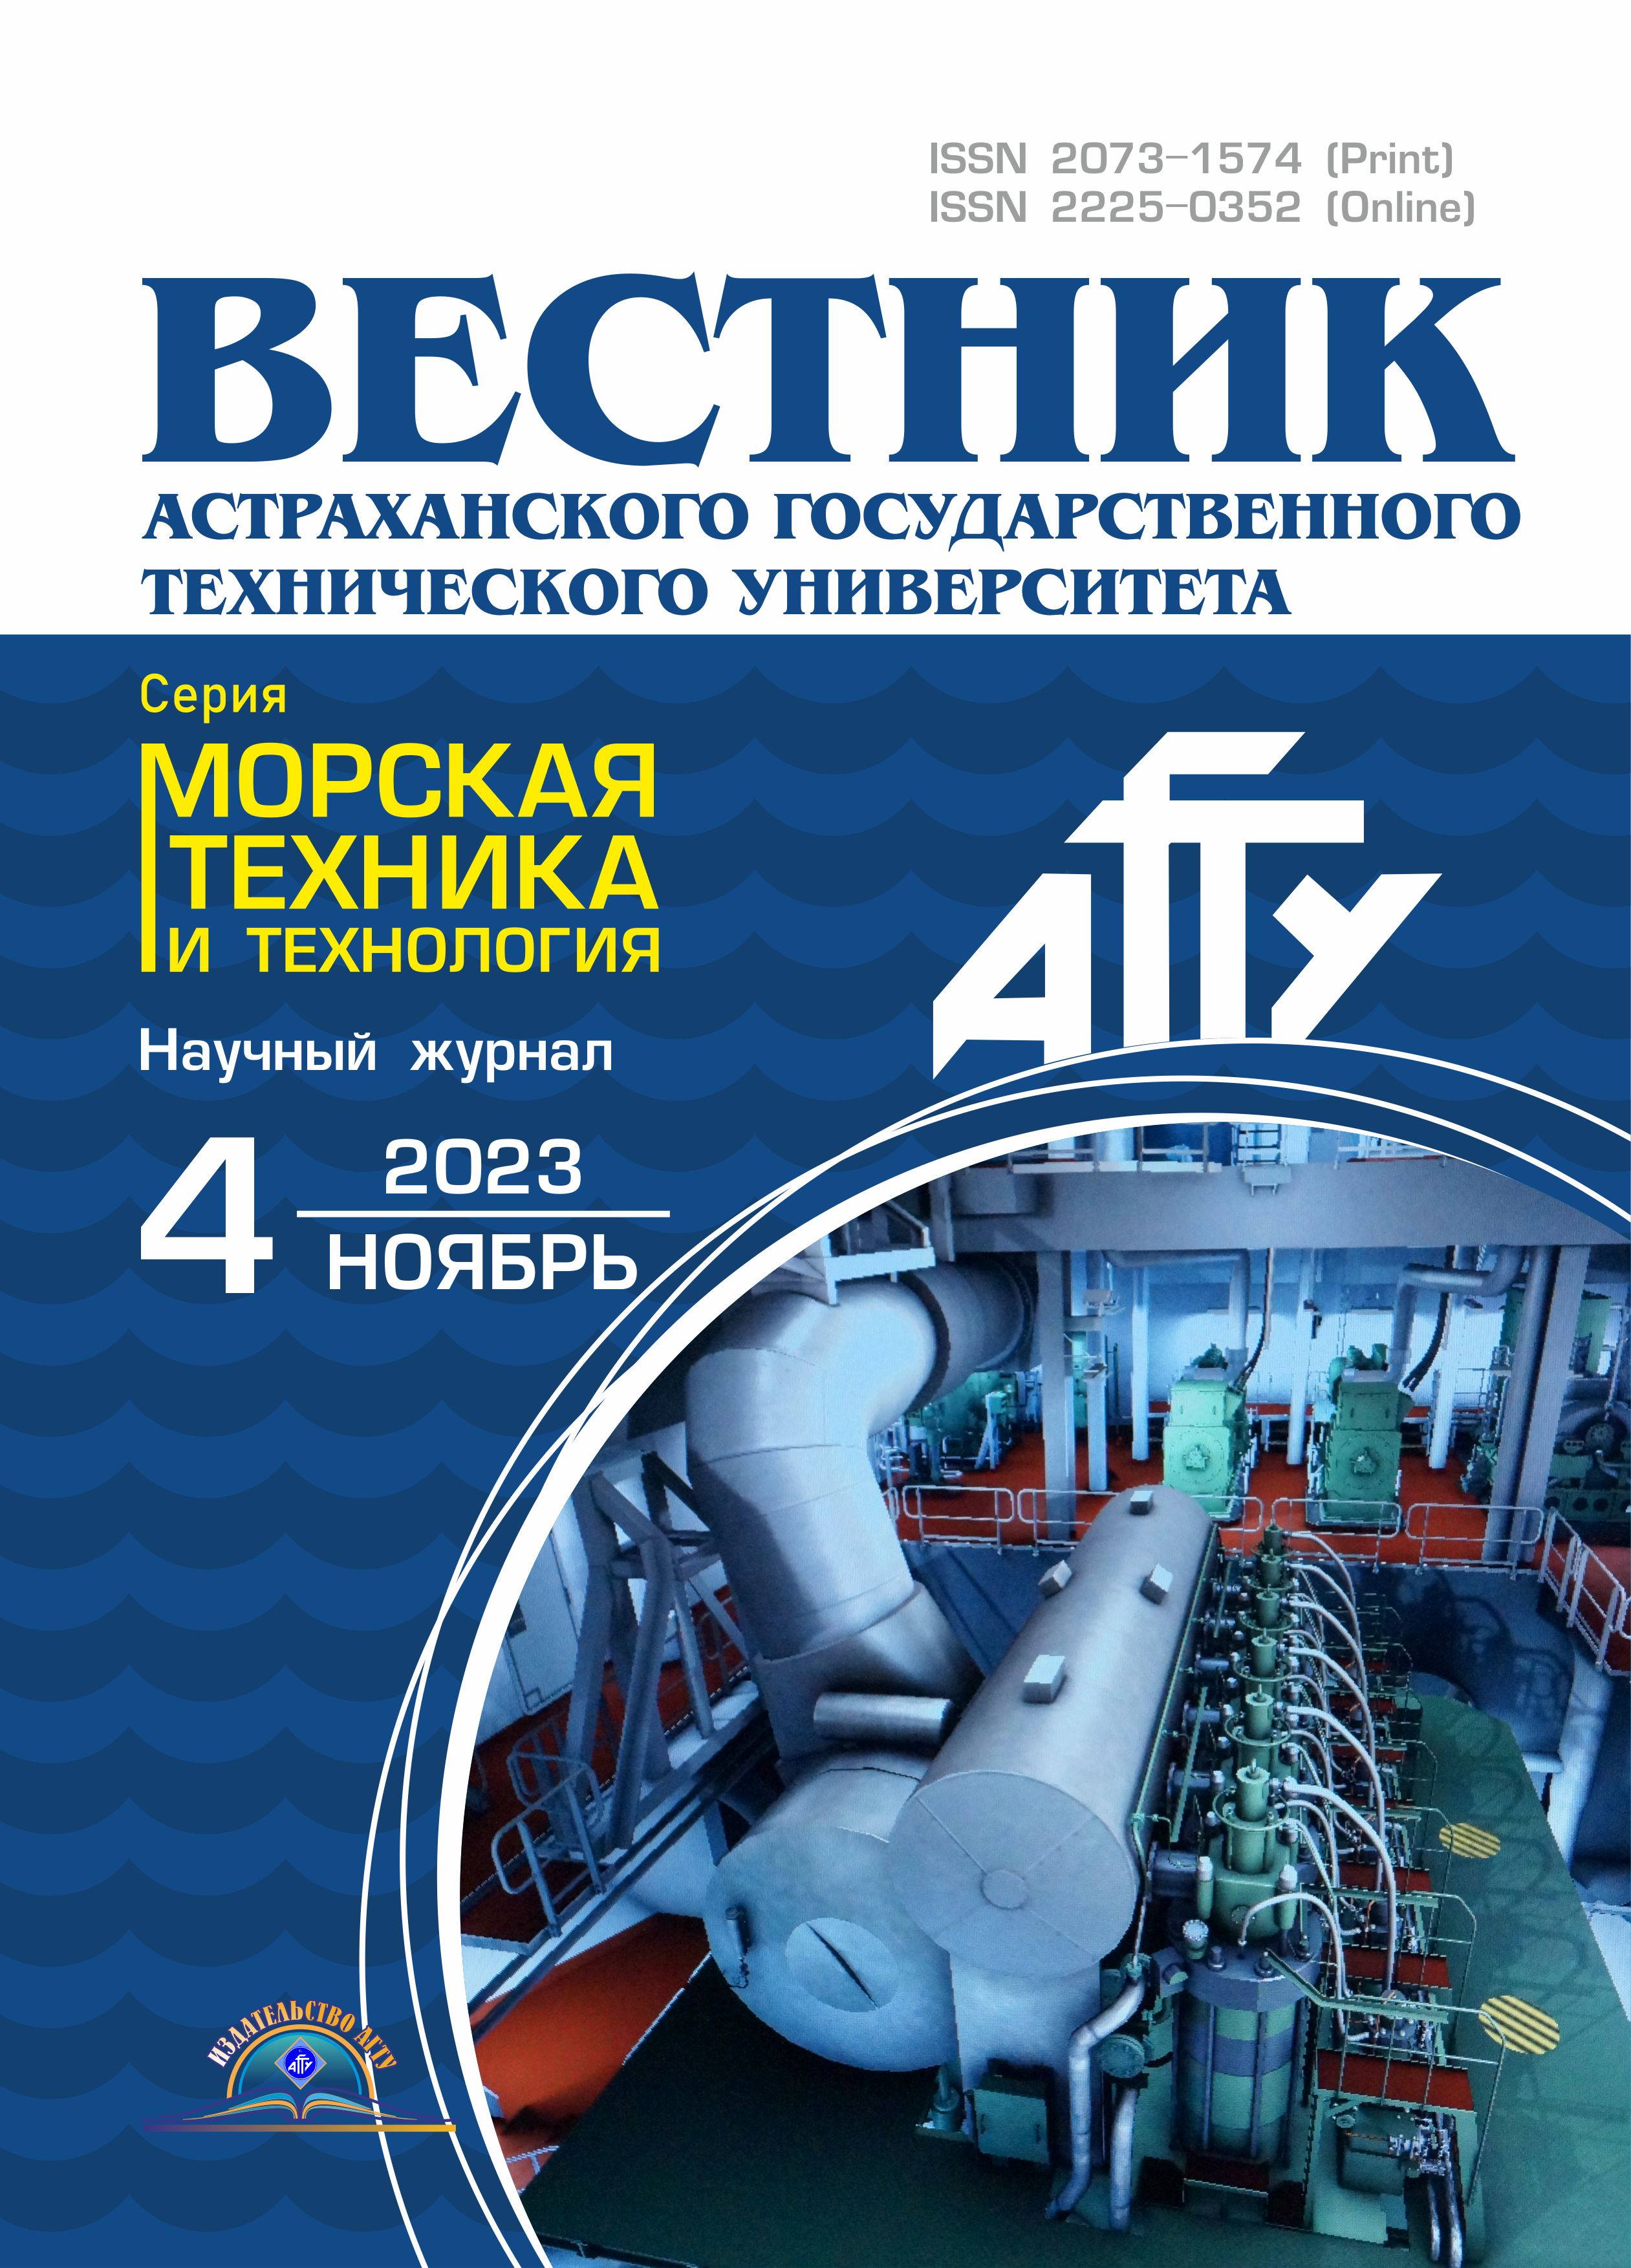                         Introduction of the educational trajectory for training workers in the ship repair field in Primorsky Kray
            